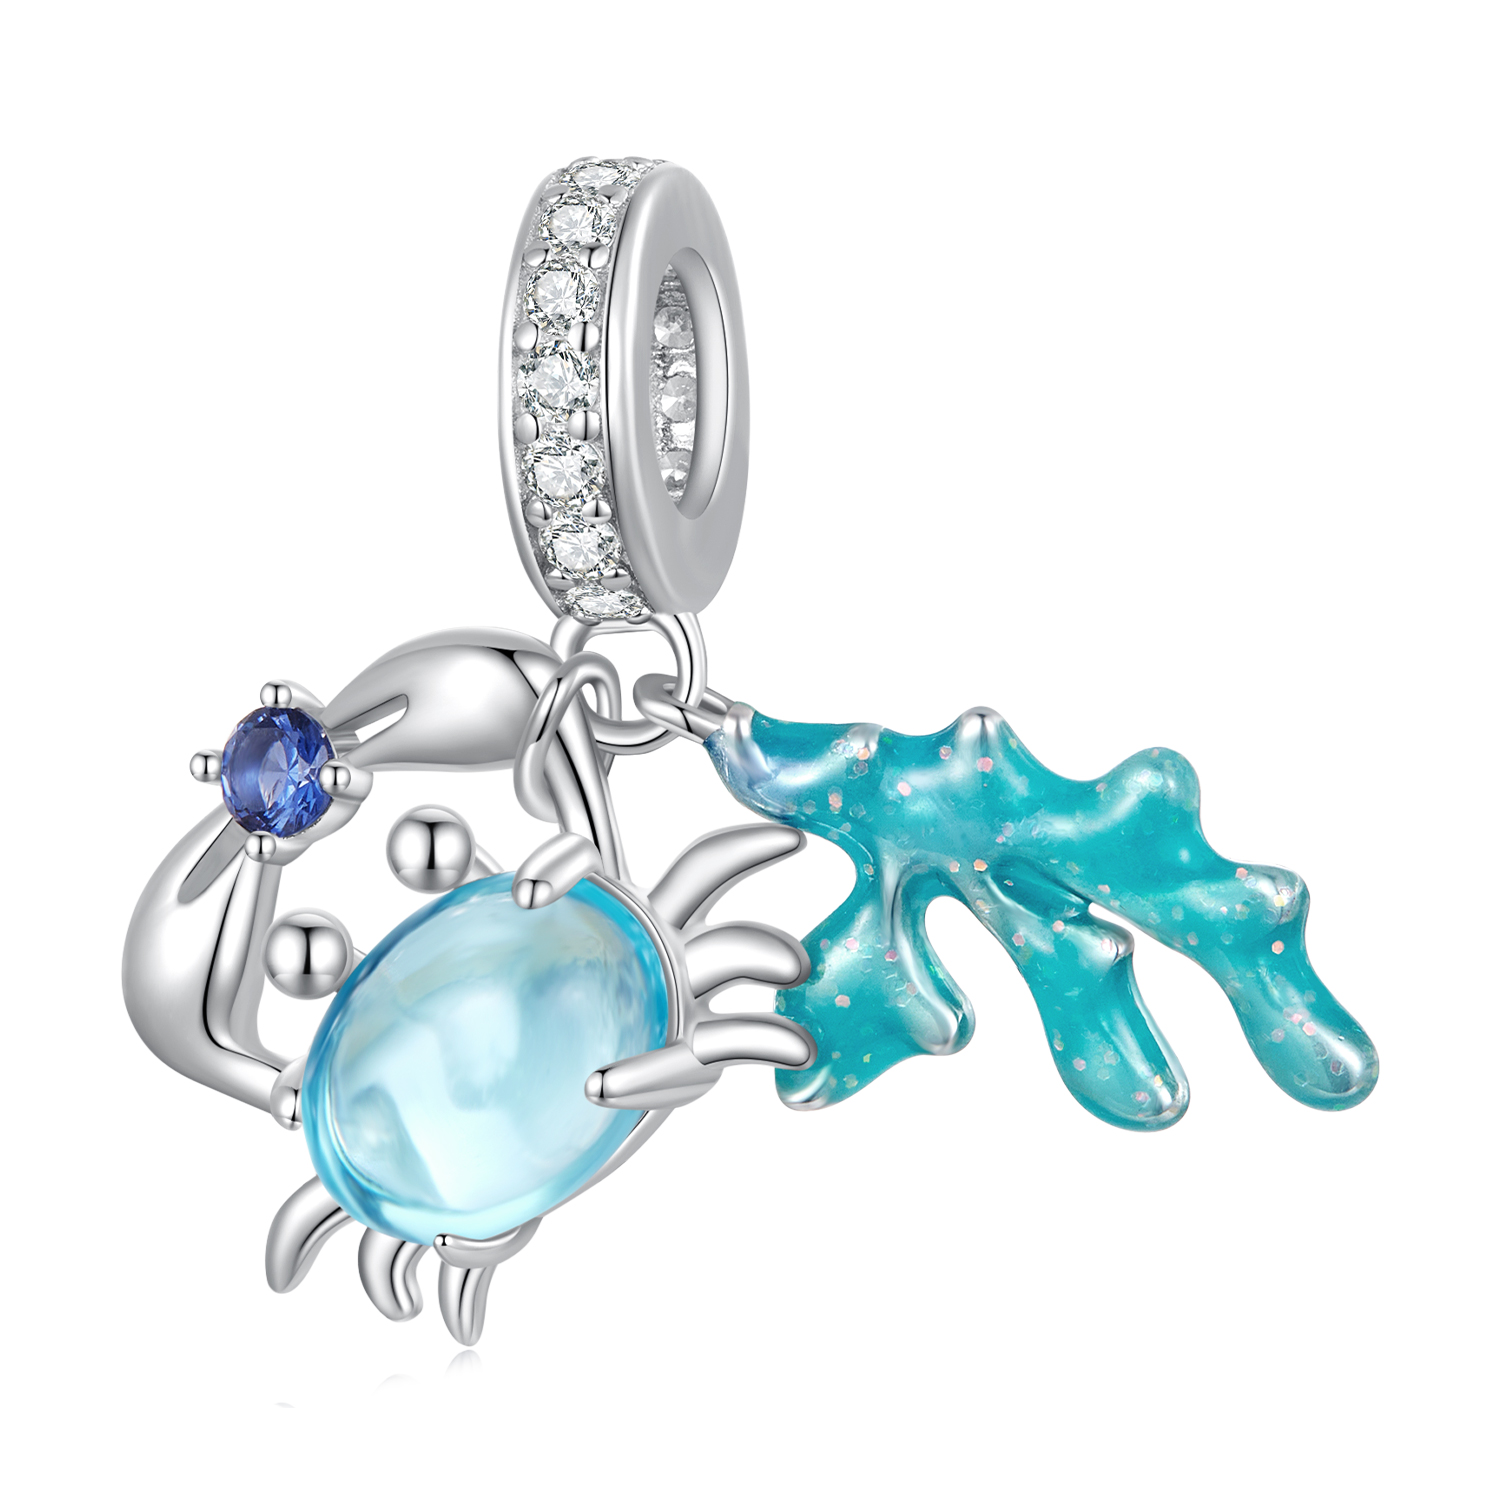 pandora style pendant charm inspired by the beauty of a crab and seaweed scc2505